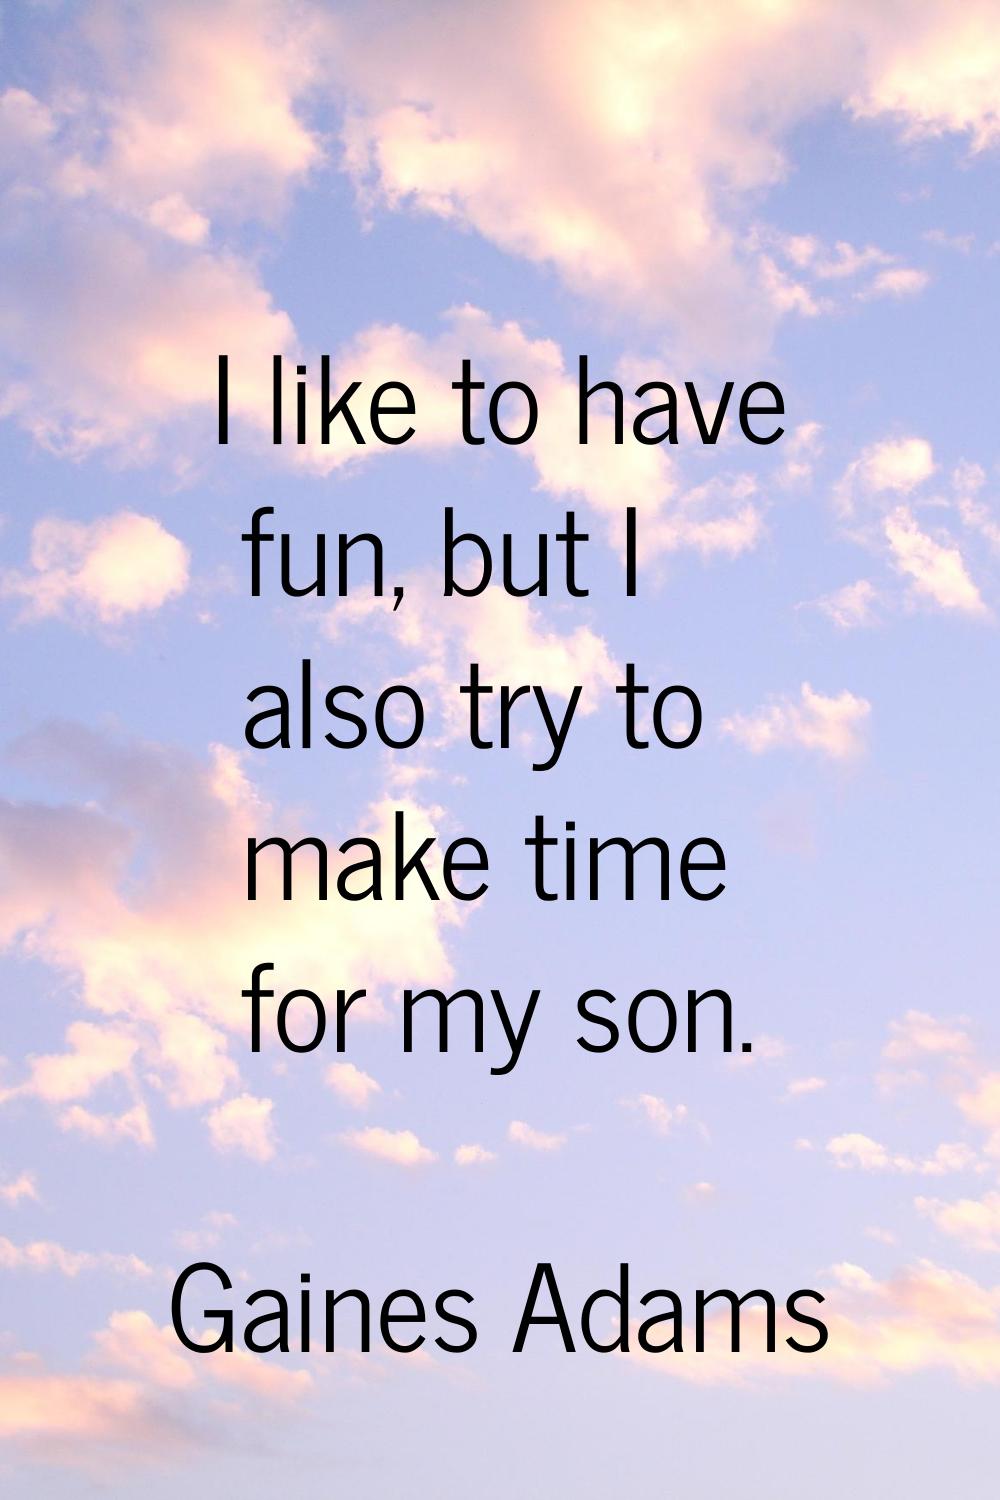 I like to have fun, but I also try to make time for my son.